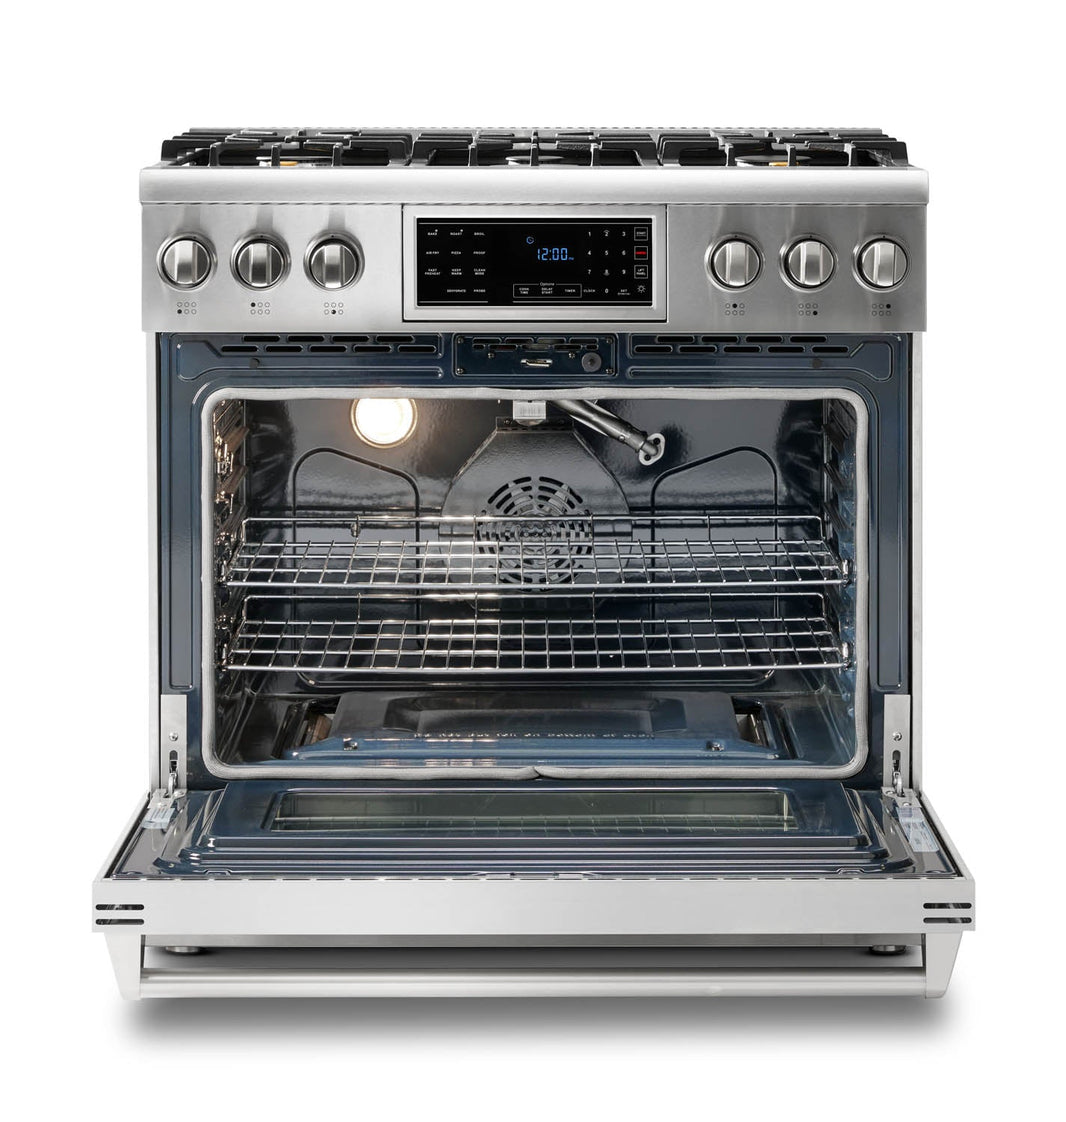 Thor Kitchen 36-Inch 6.0 Cu. Ft. Oven Gas Range with Tilt Panel and Self-Cleaning Oven in Stainless Steel (TRG3601)